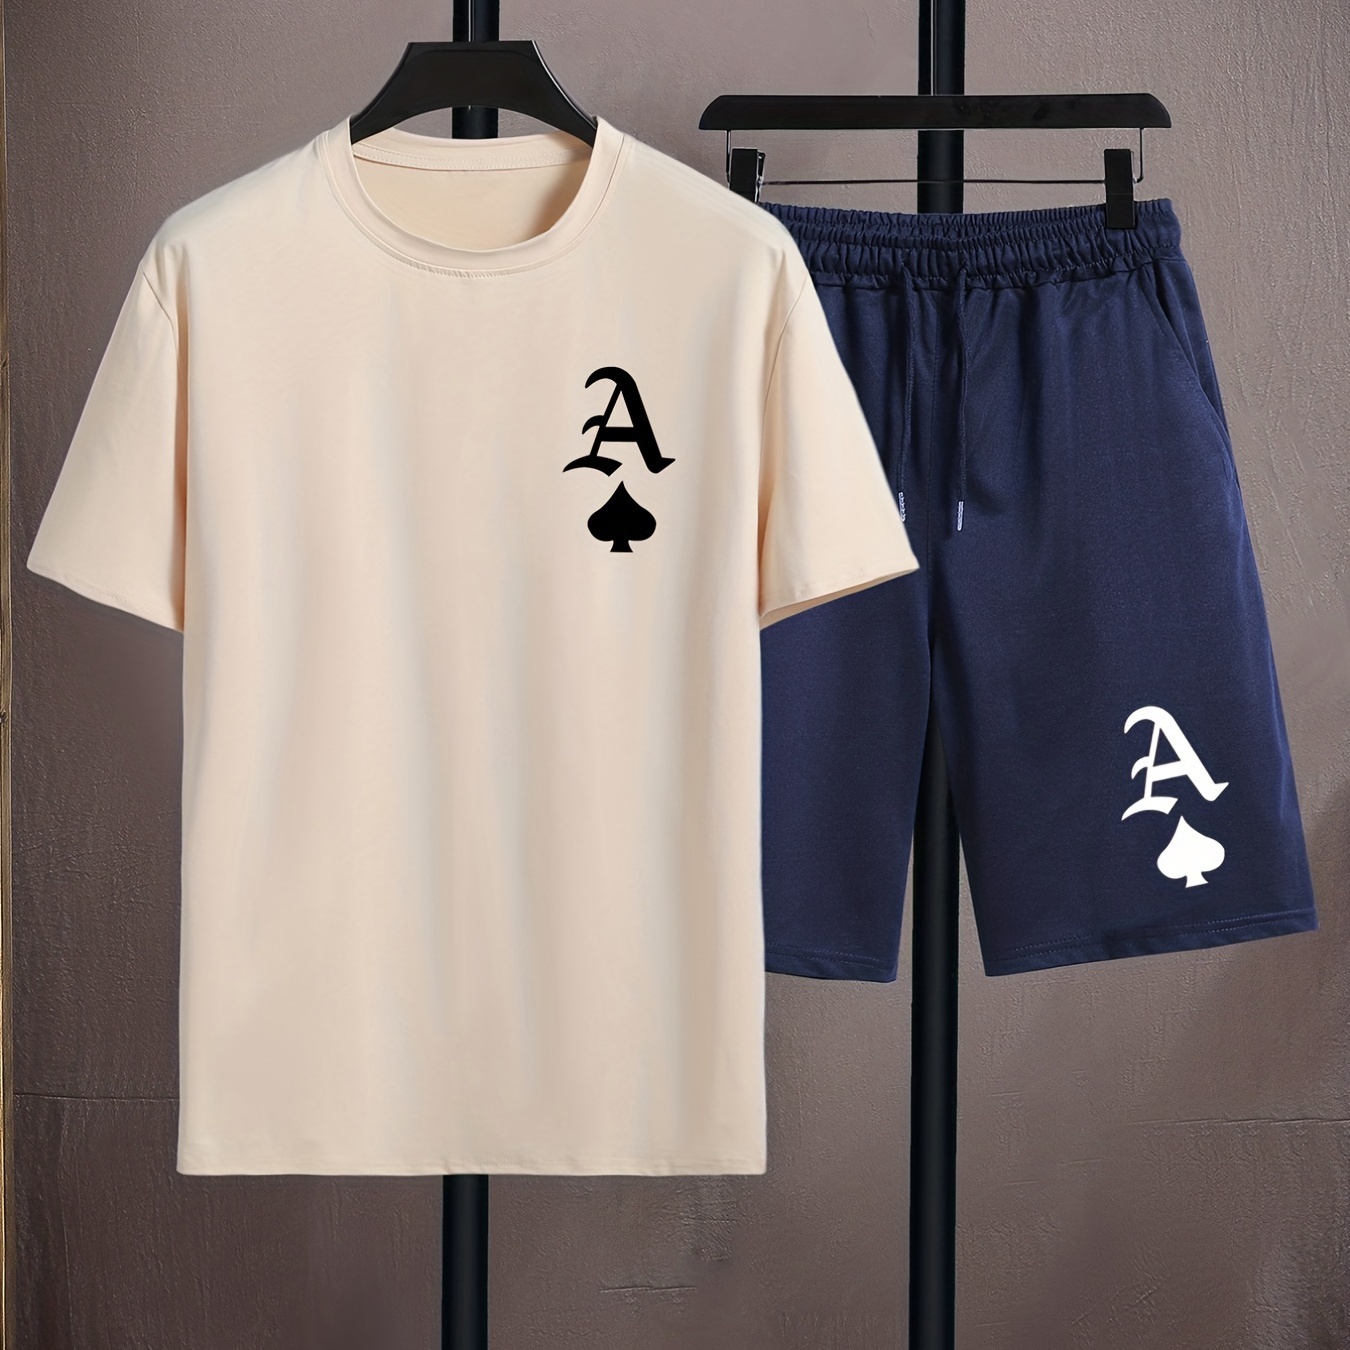 

Letter A & Poker Symbol Pattern Men's 2 Pieces Outfits, Round Neck Short Sleeve T-shirt And Drawstring Shorts Set